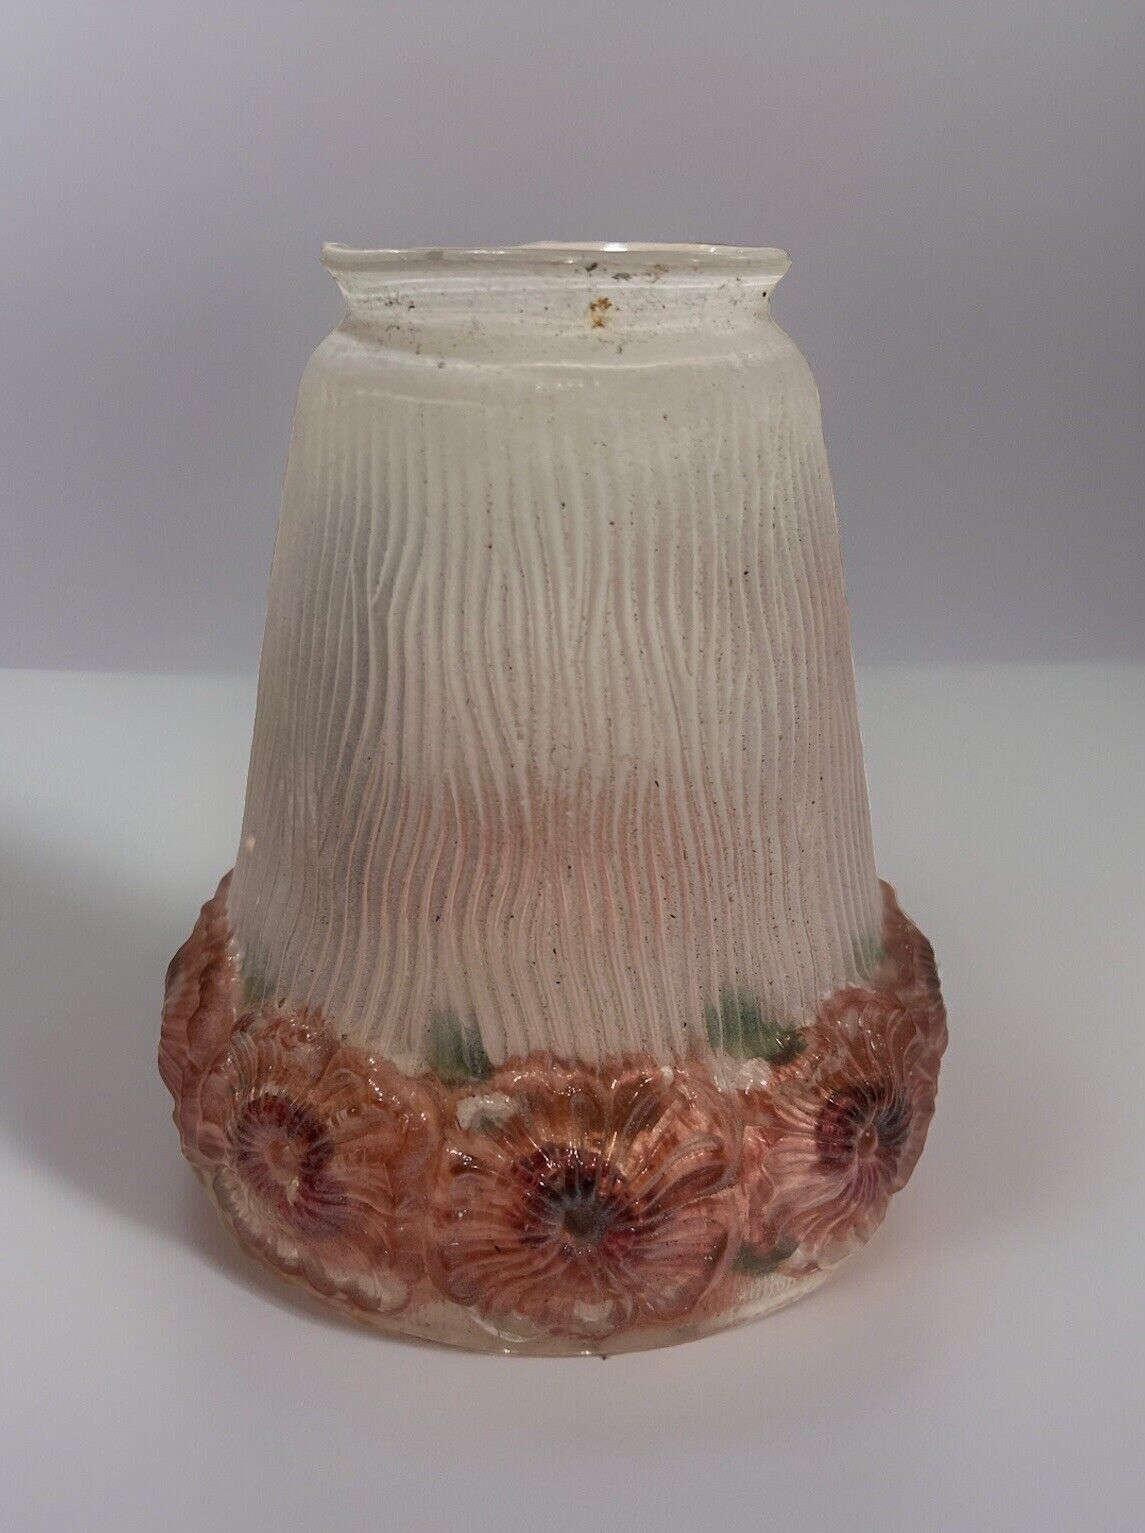 Vintage 40s/50s frosted clear glass light fixture shade painted pink flowers